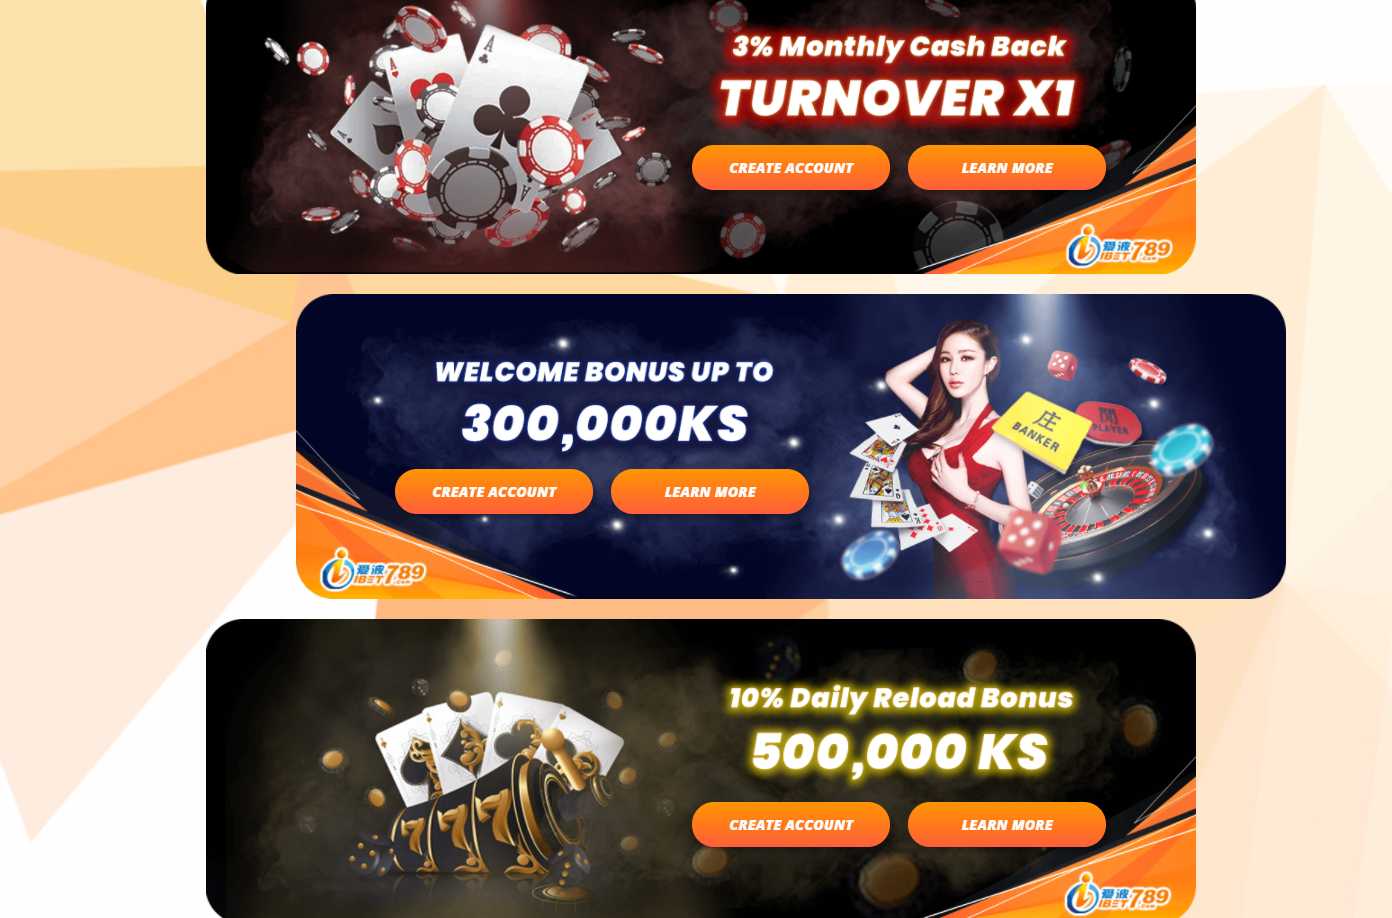 ibet789 awesome Bonus Offers for New Users